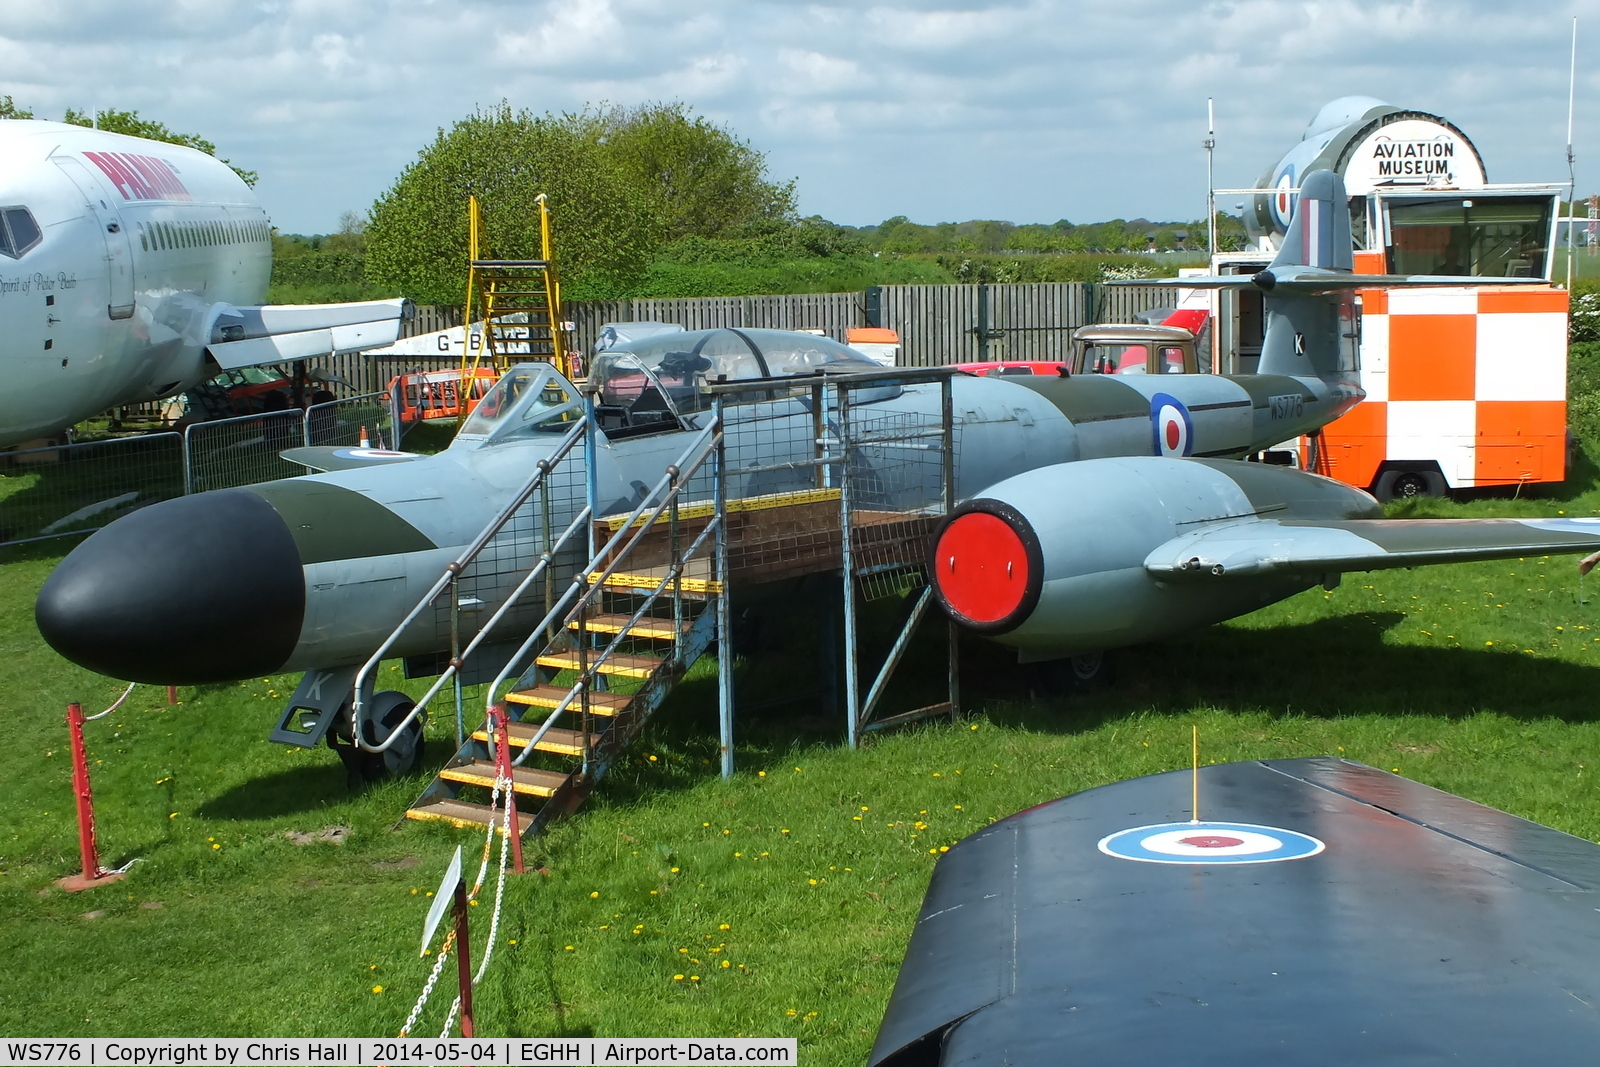 WS776, 1954 Gloster Meteor NF.14 C/N Not found WS776, at the Bournemouth Aviaton Museum